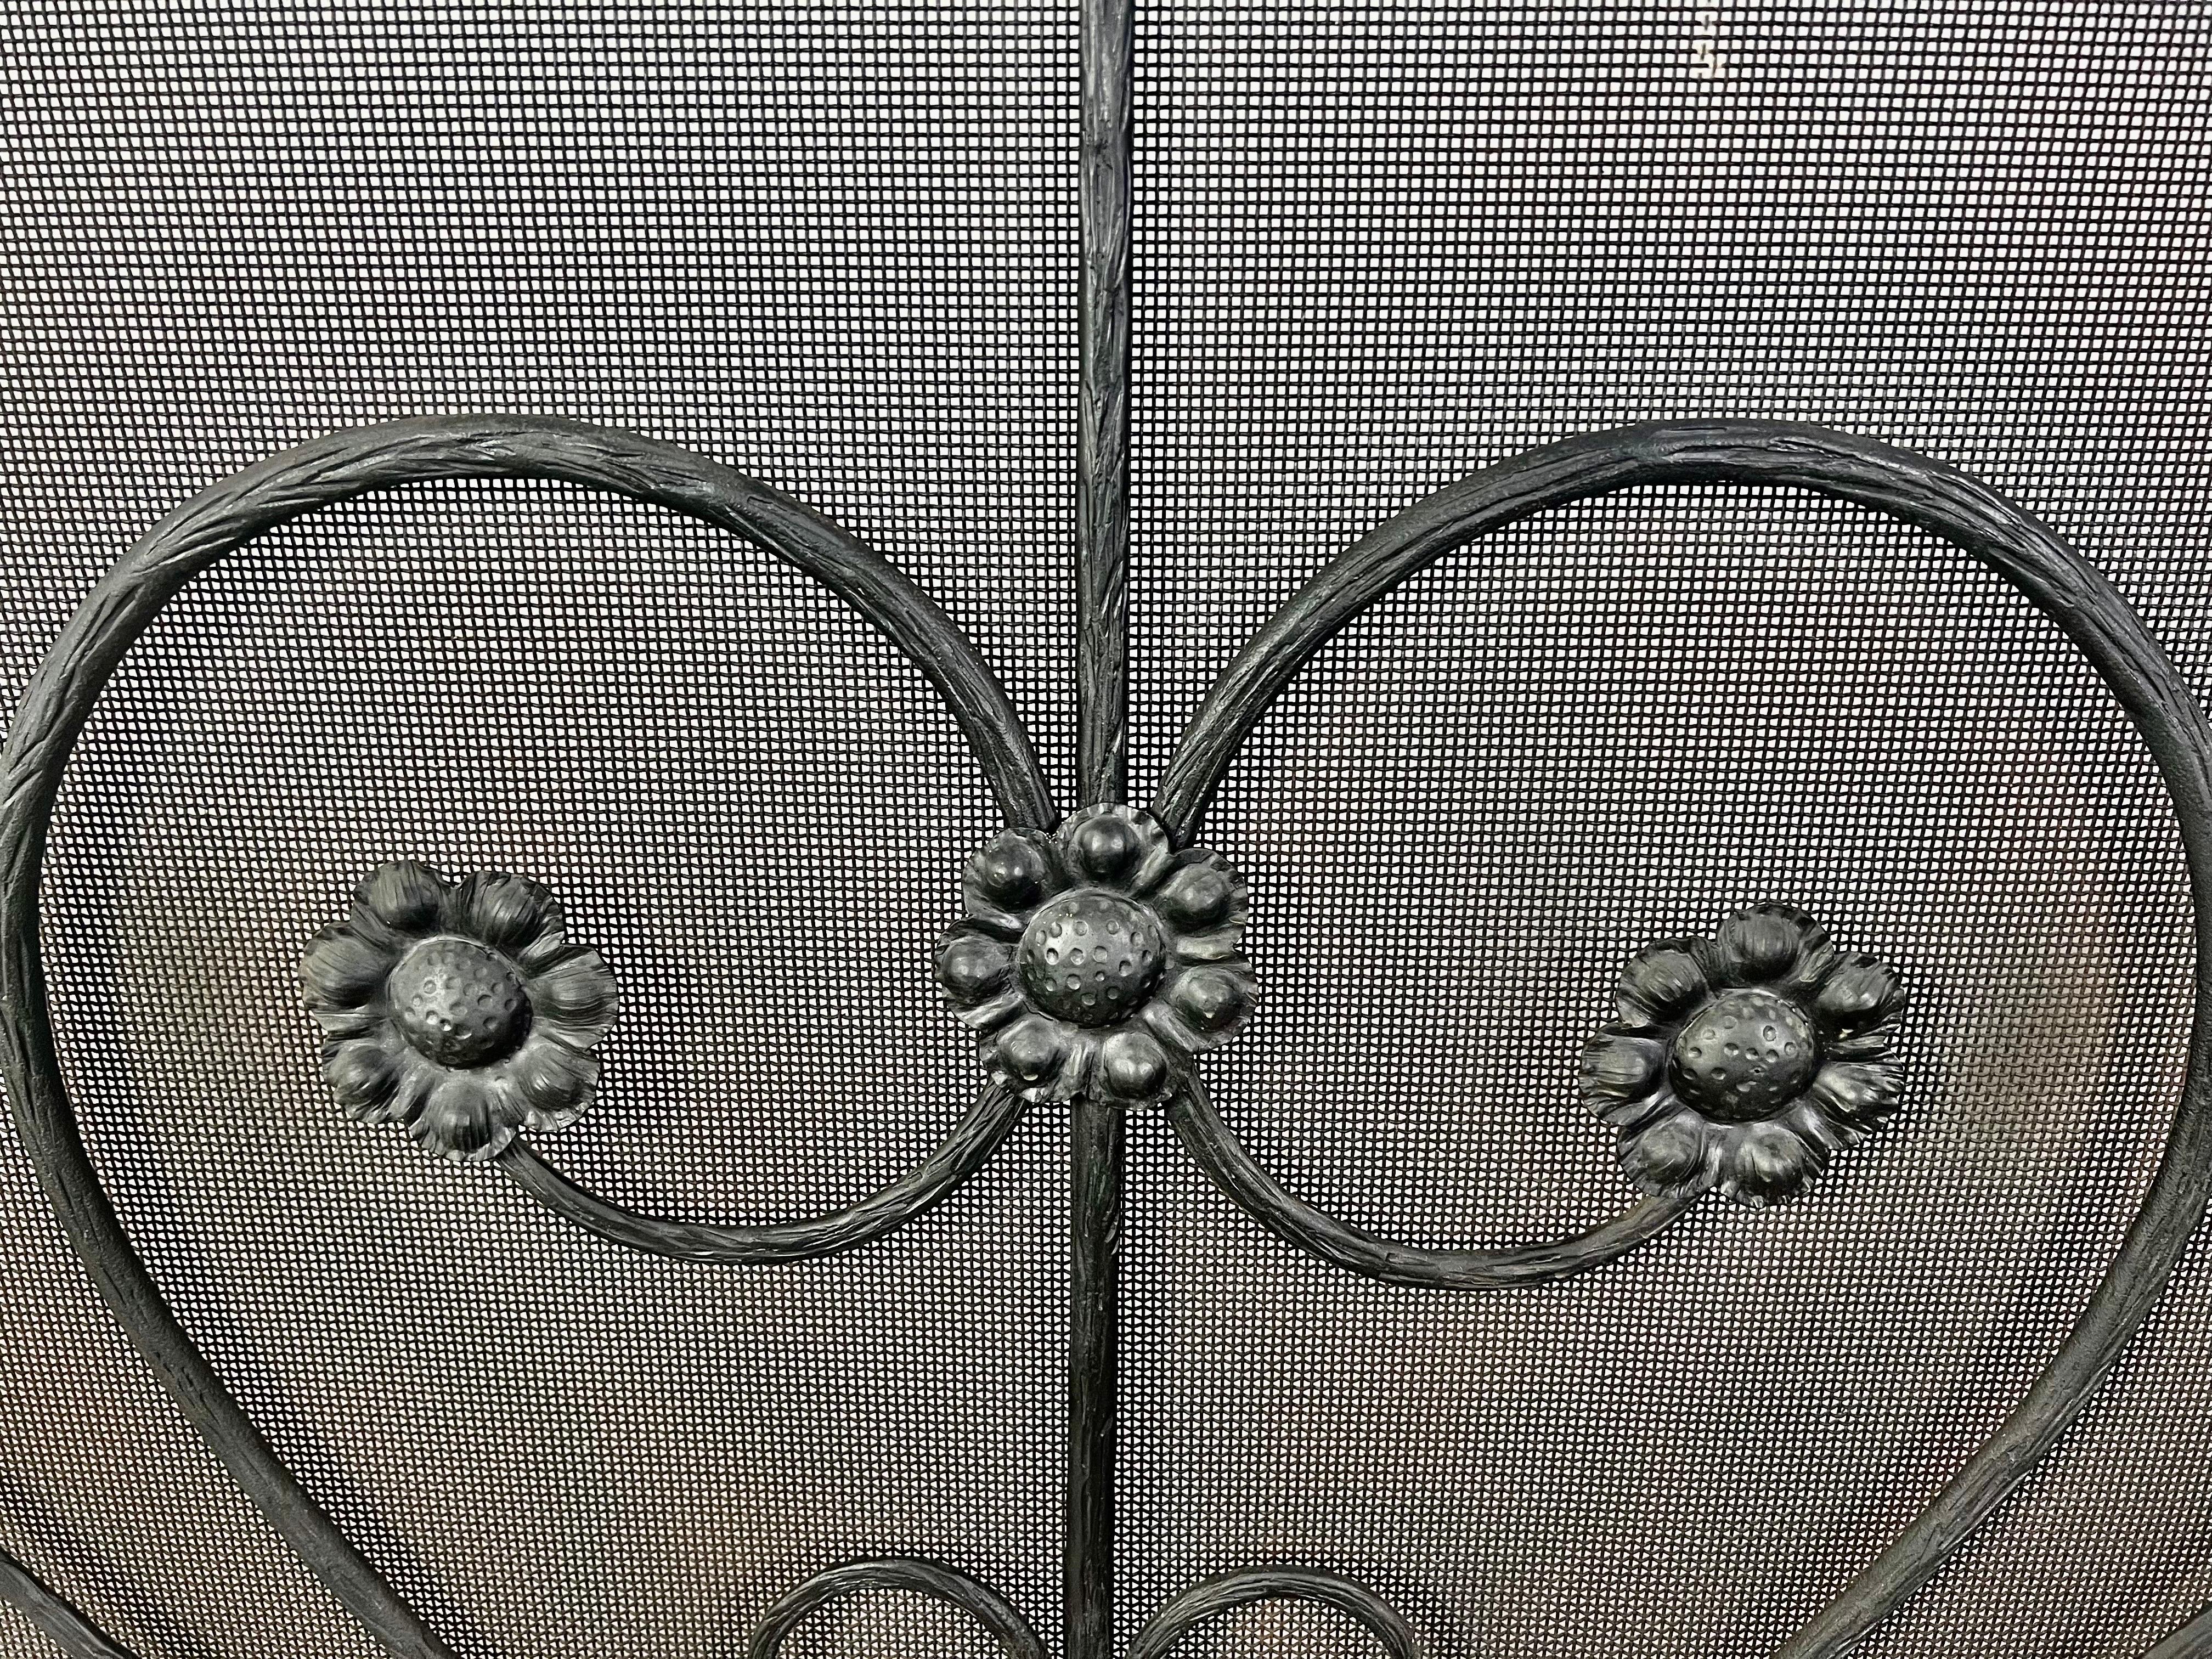 American Wrought Iron Fireplace Screen w/ Cast Handles For Sale